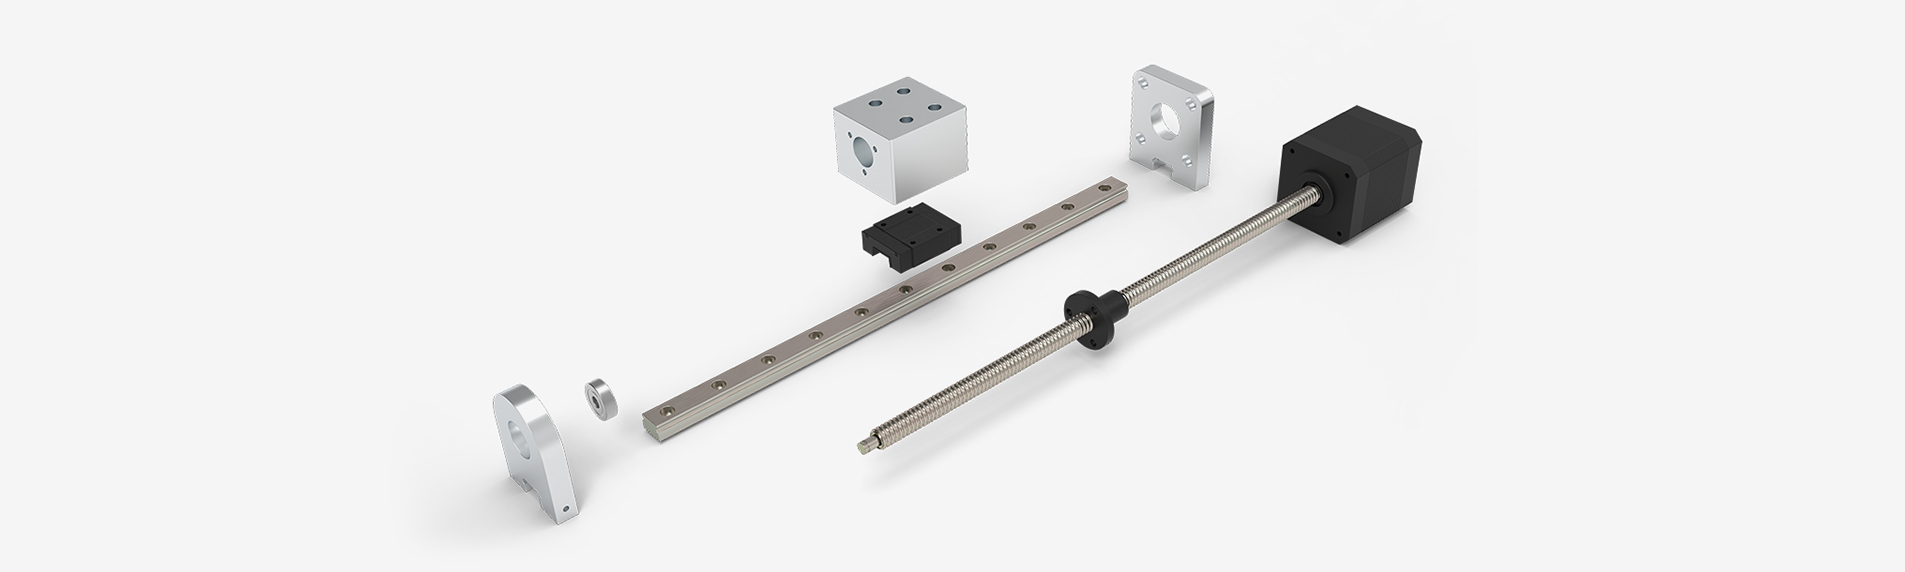 Anatomy of a Compact Linear Systems